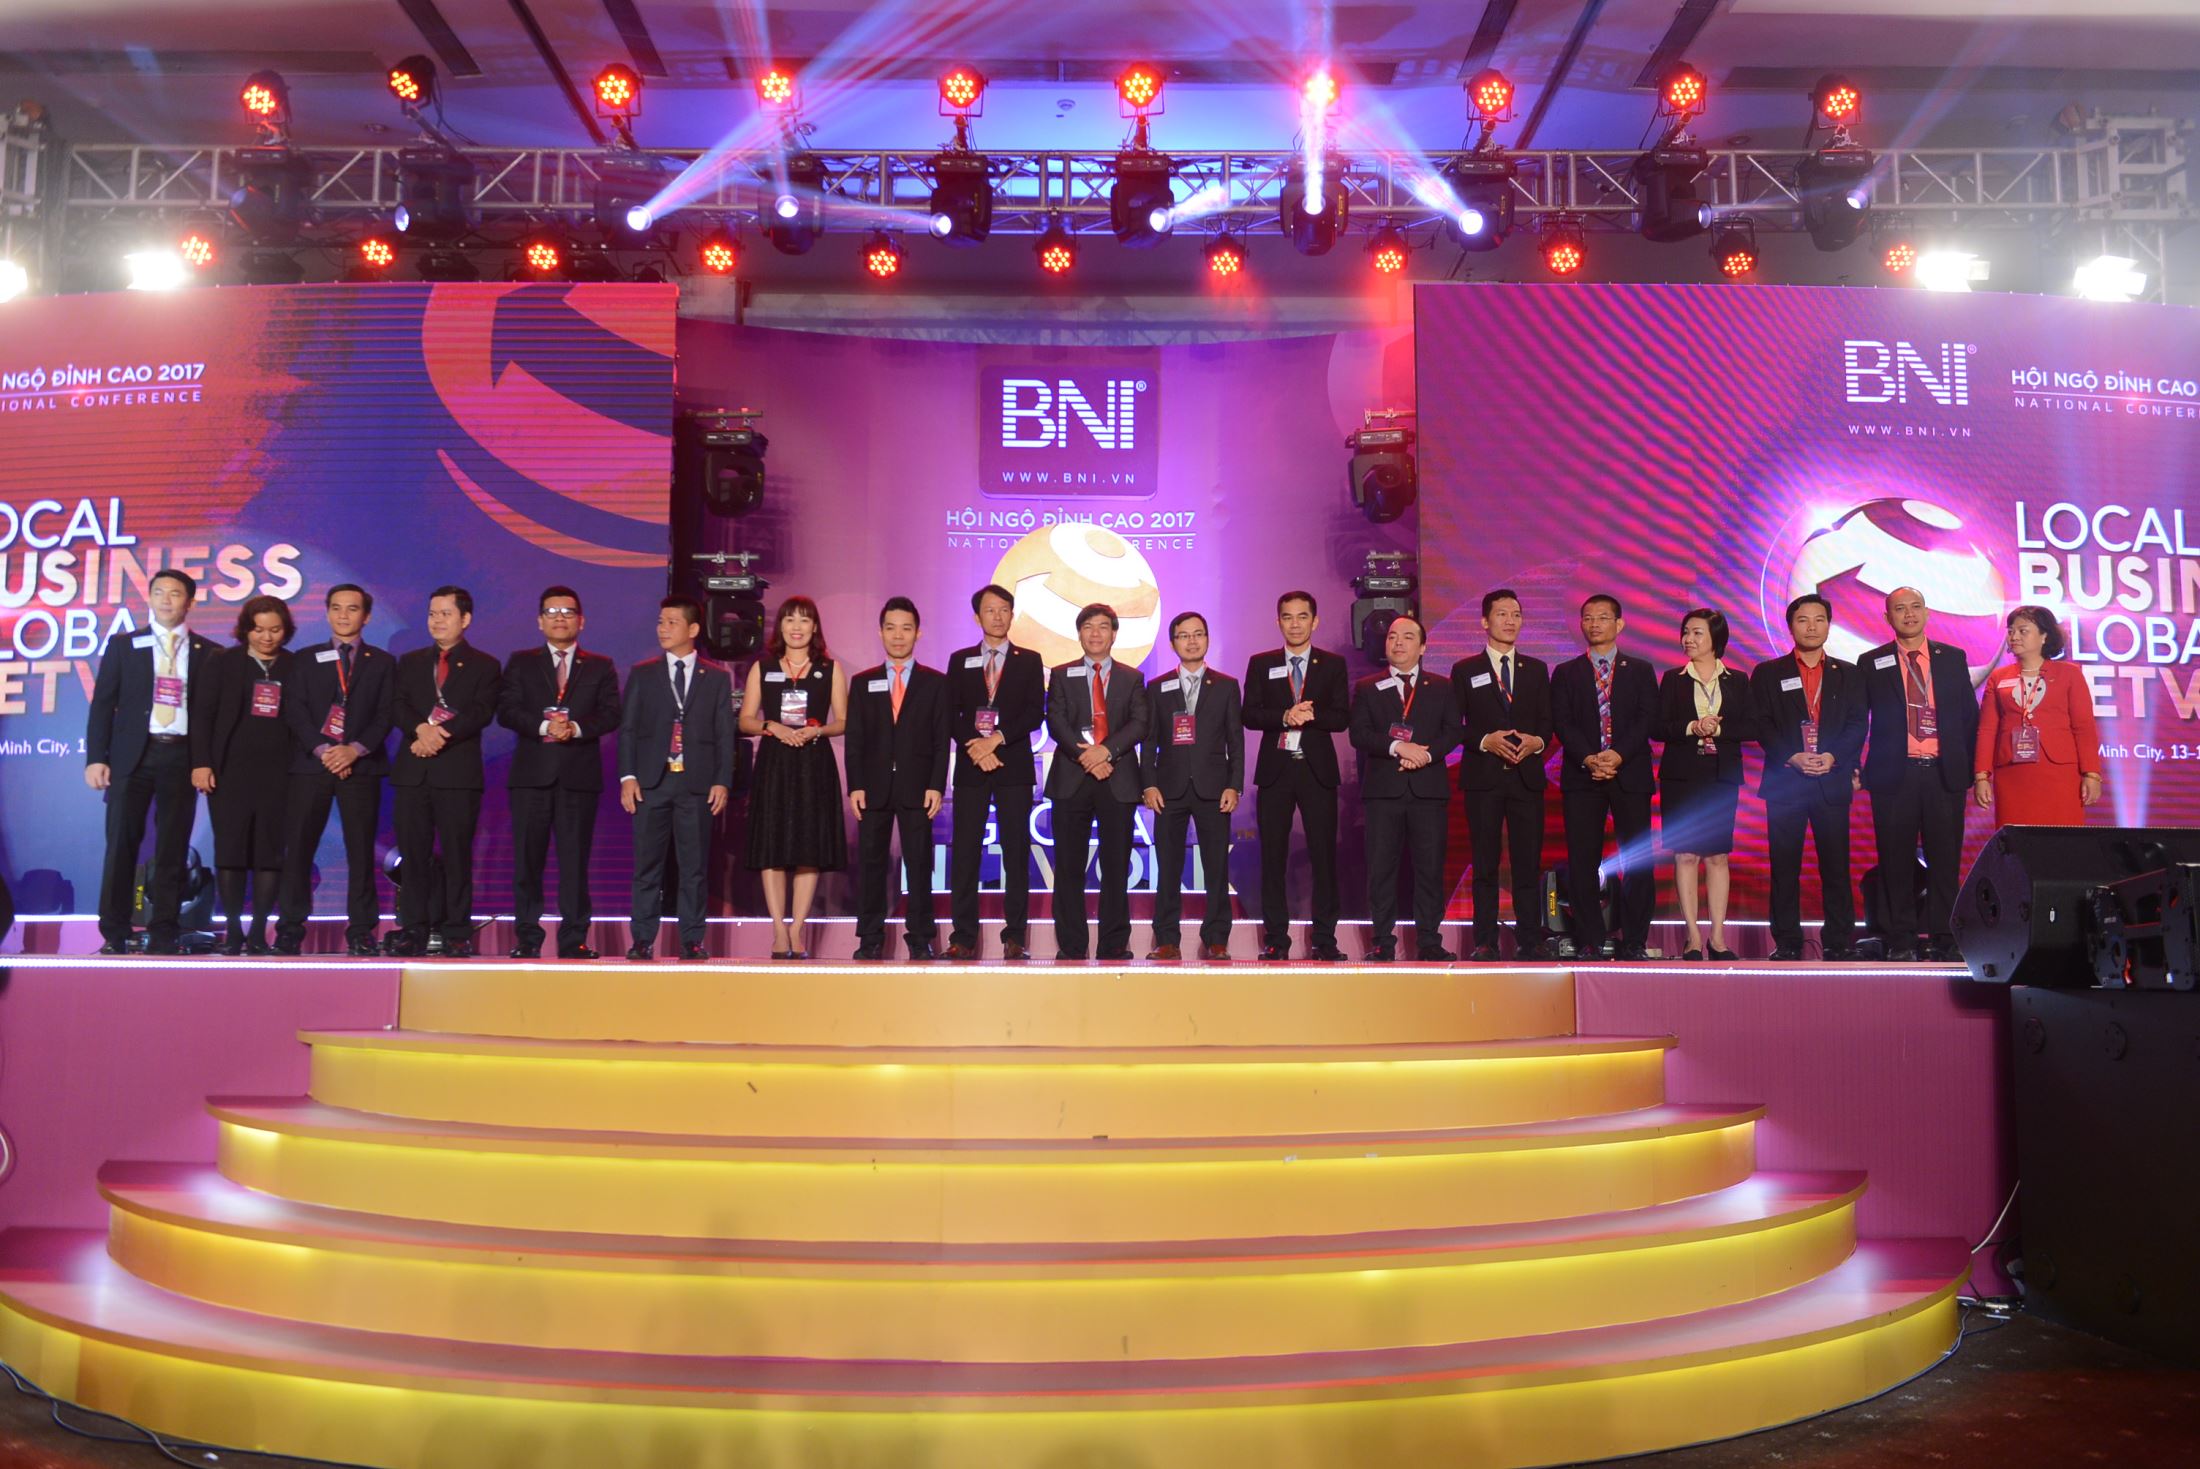 BNI Vietnam National Conference 2017 with the topic  "Local Business, Global Network" has attracted 1,200 Entrepreneurs in BNI network and more than 3.000 visitors